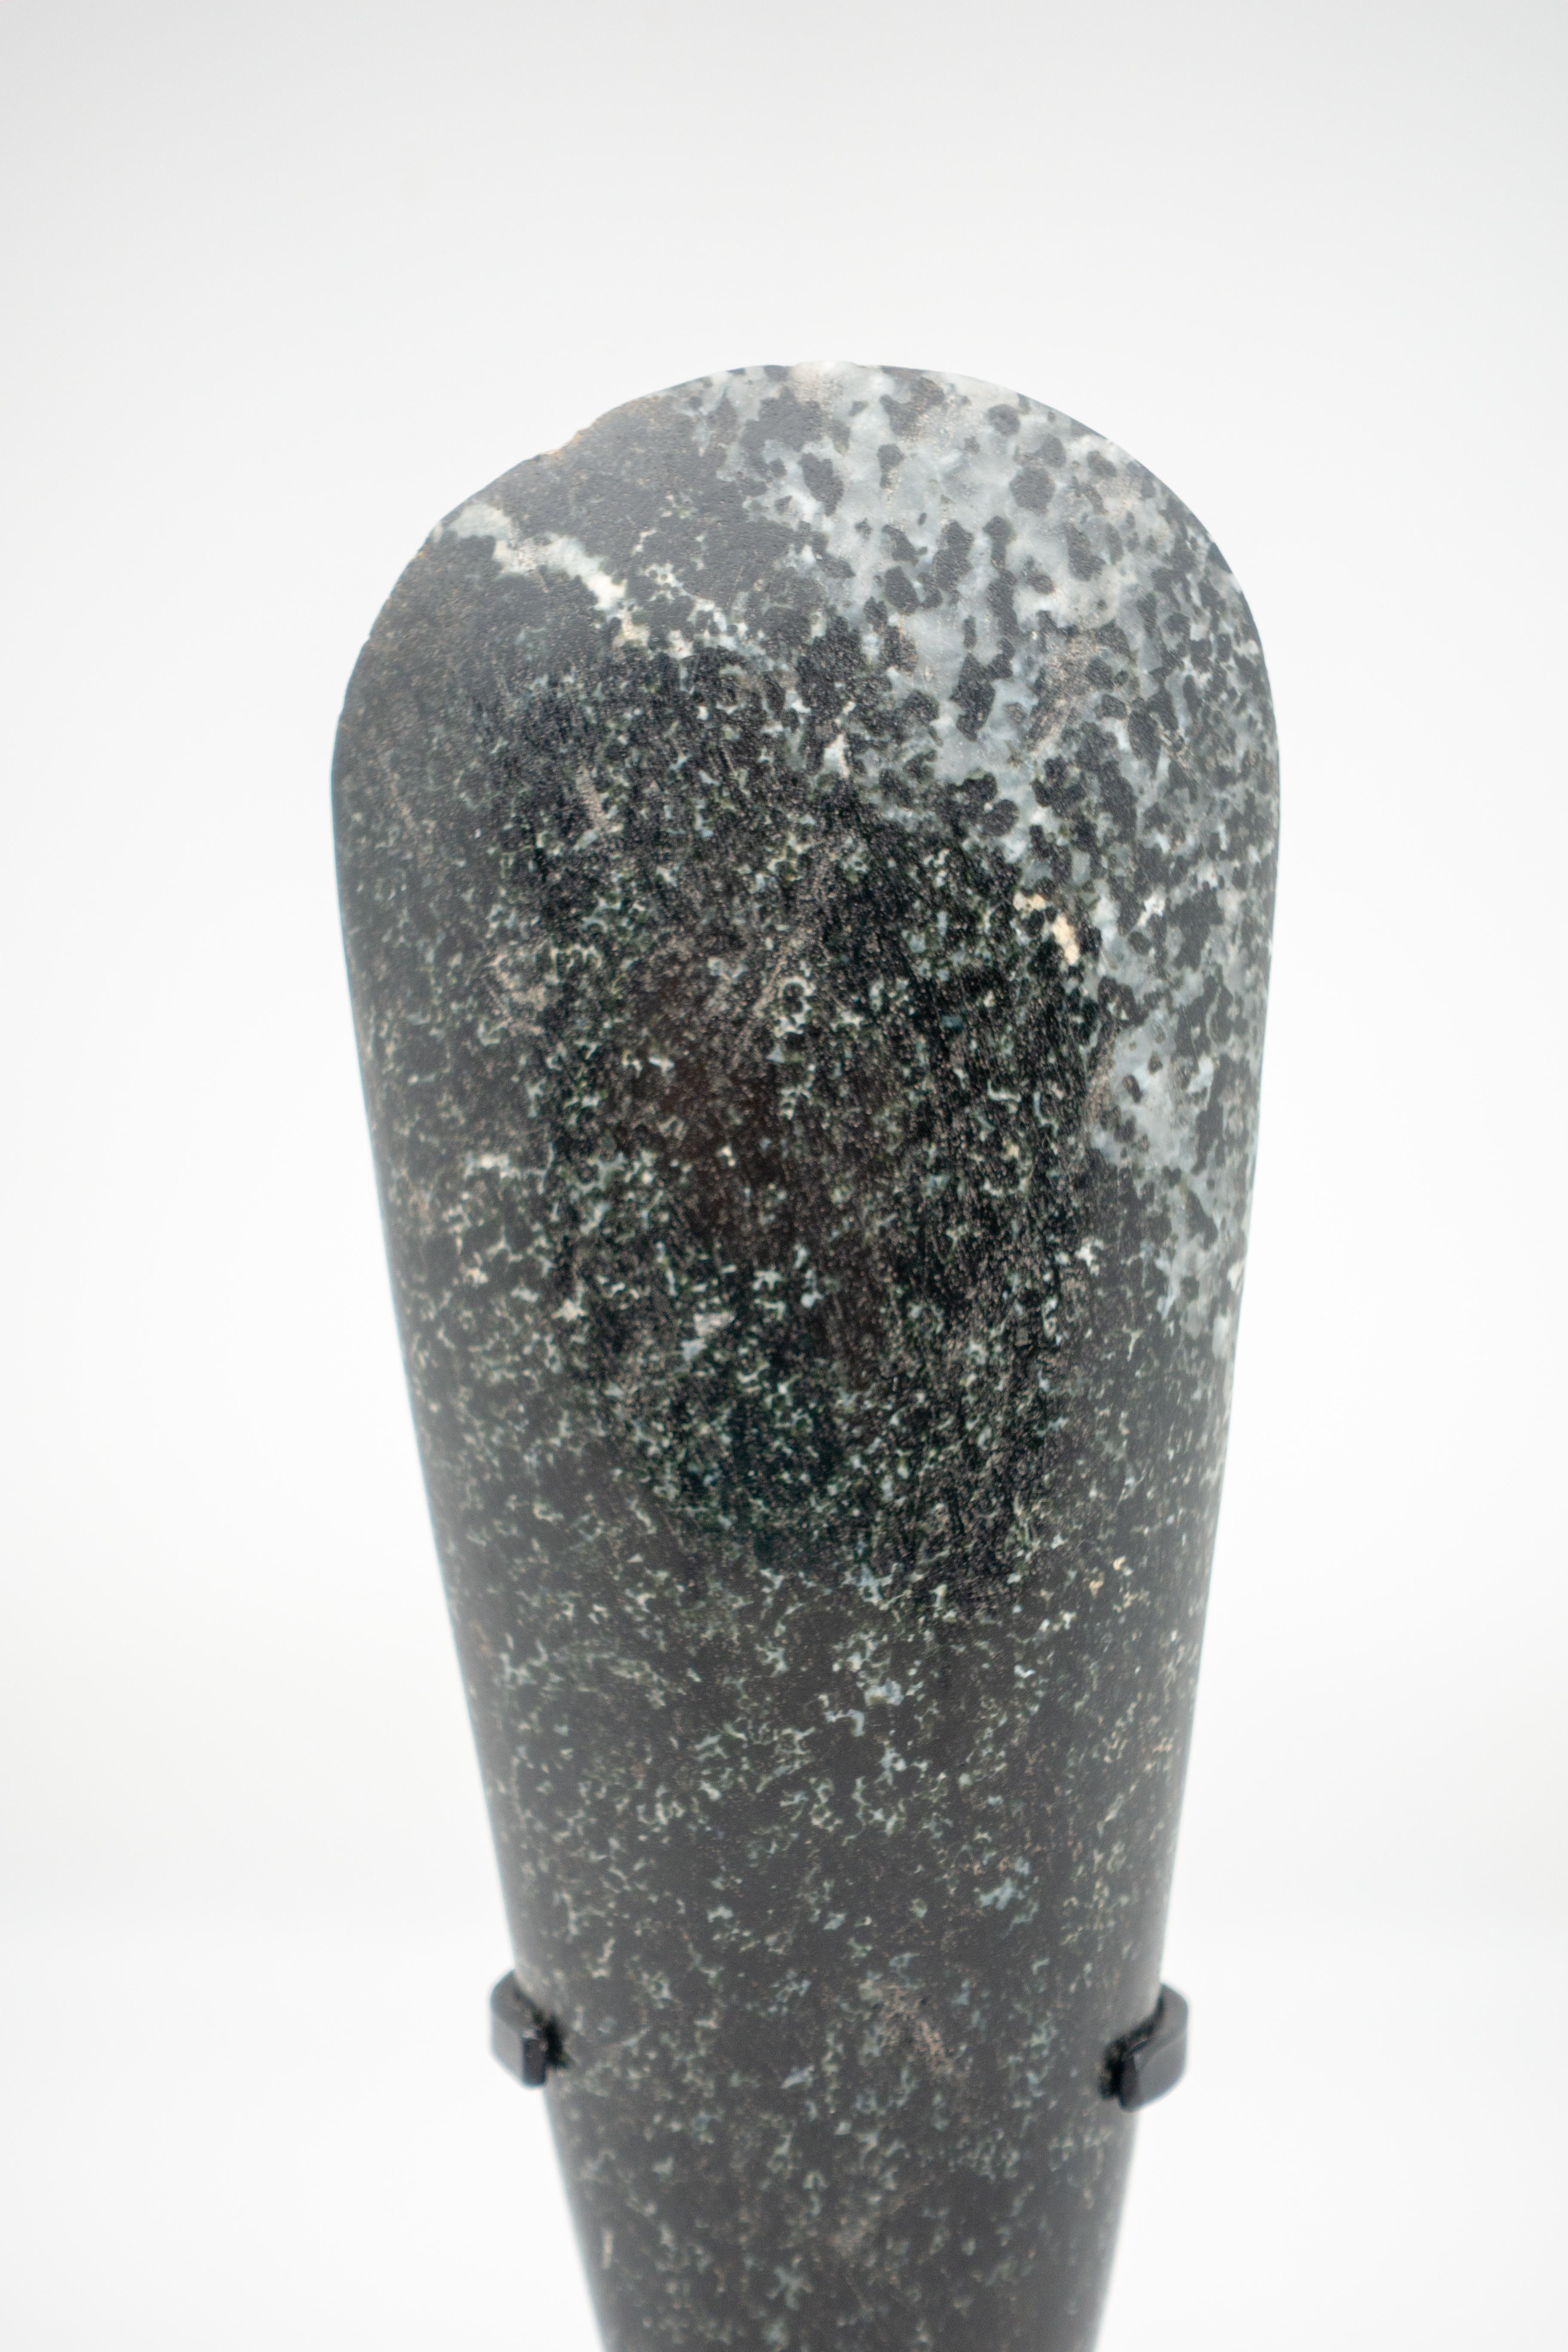 Stone axehead from Papua New Guinea mounted on a custom black steel base.